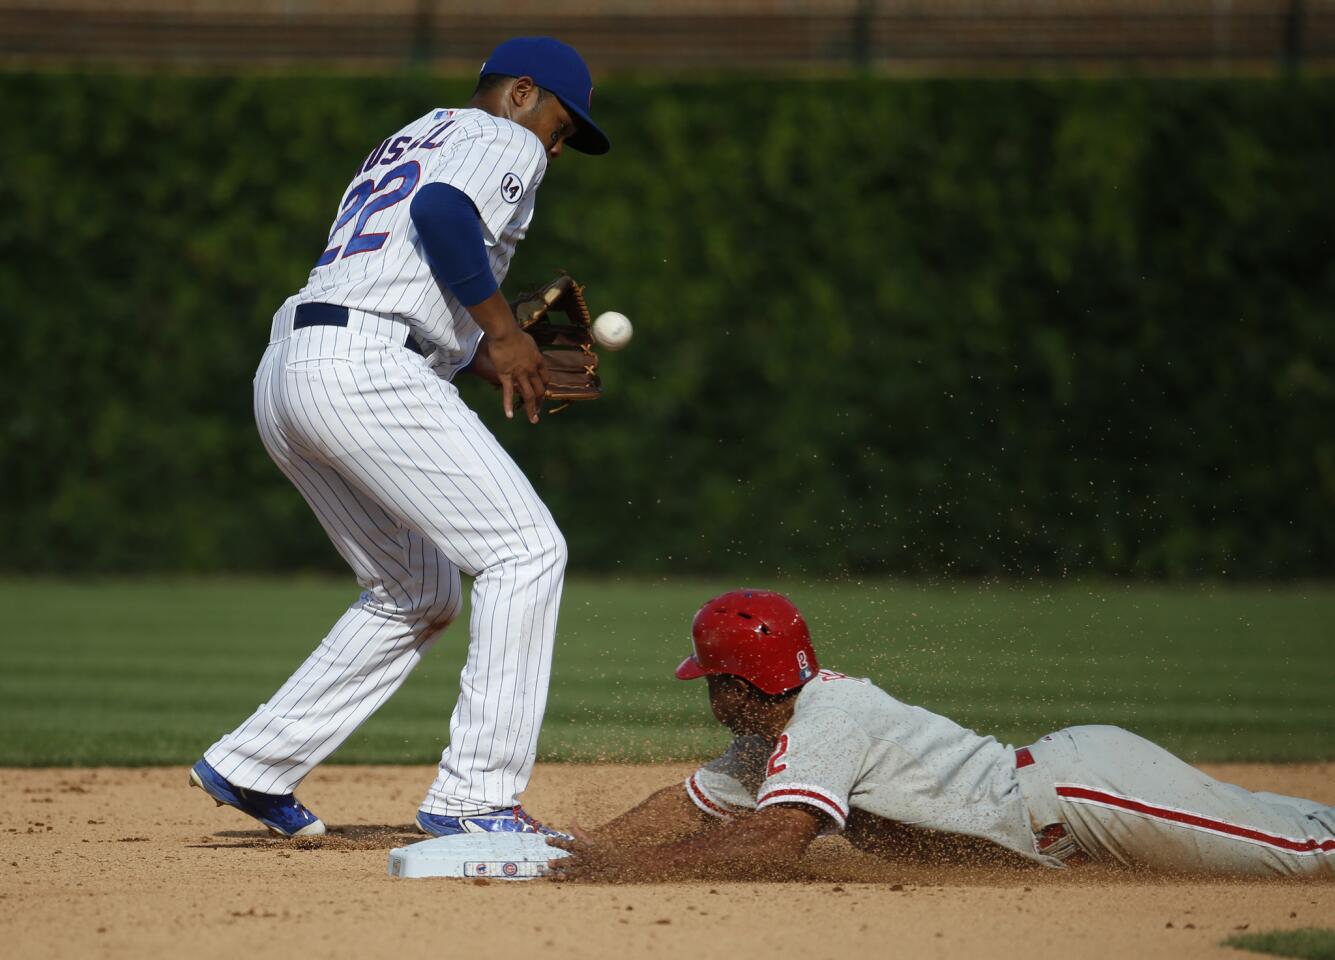 Cubs second baseman Addison Russell attempts to tag out Philadelphia Phillies left fielder Ben Revere.